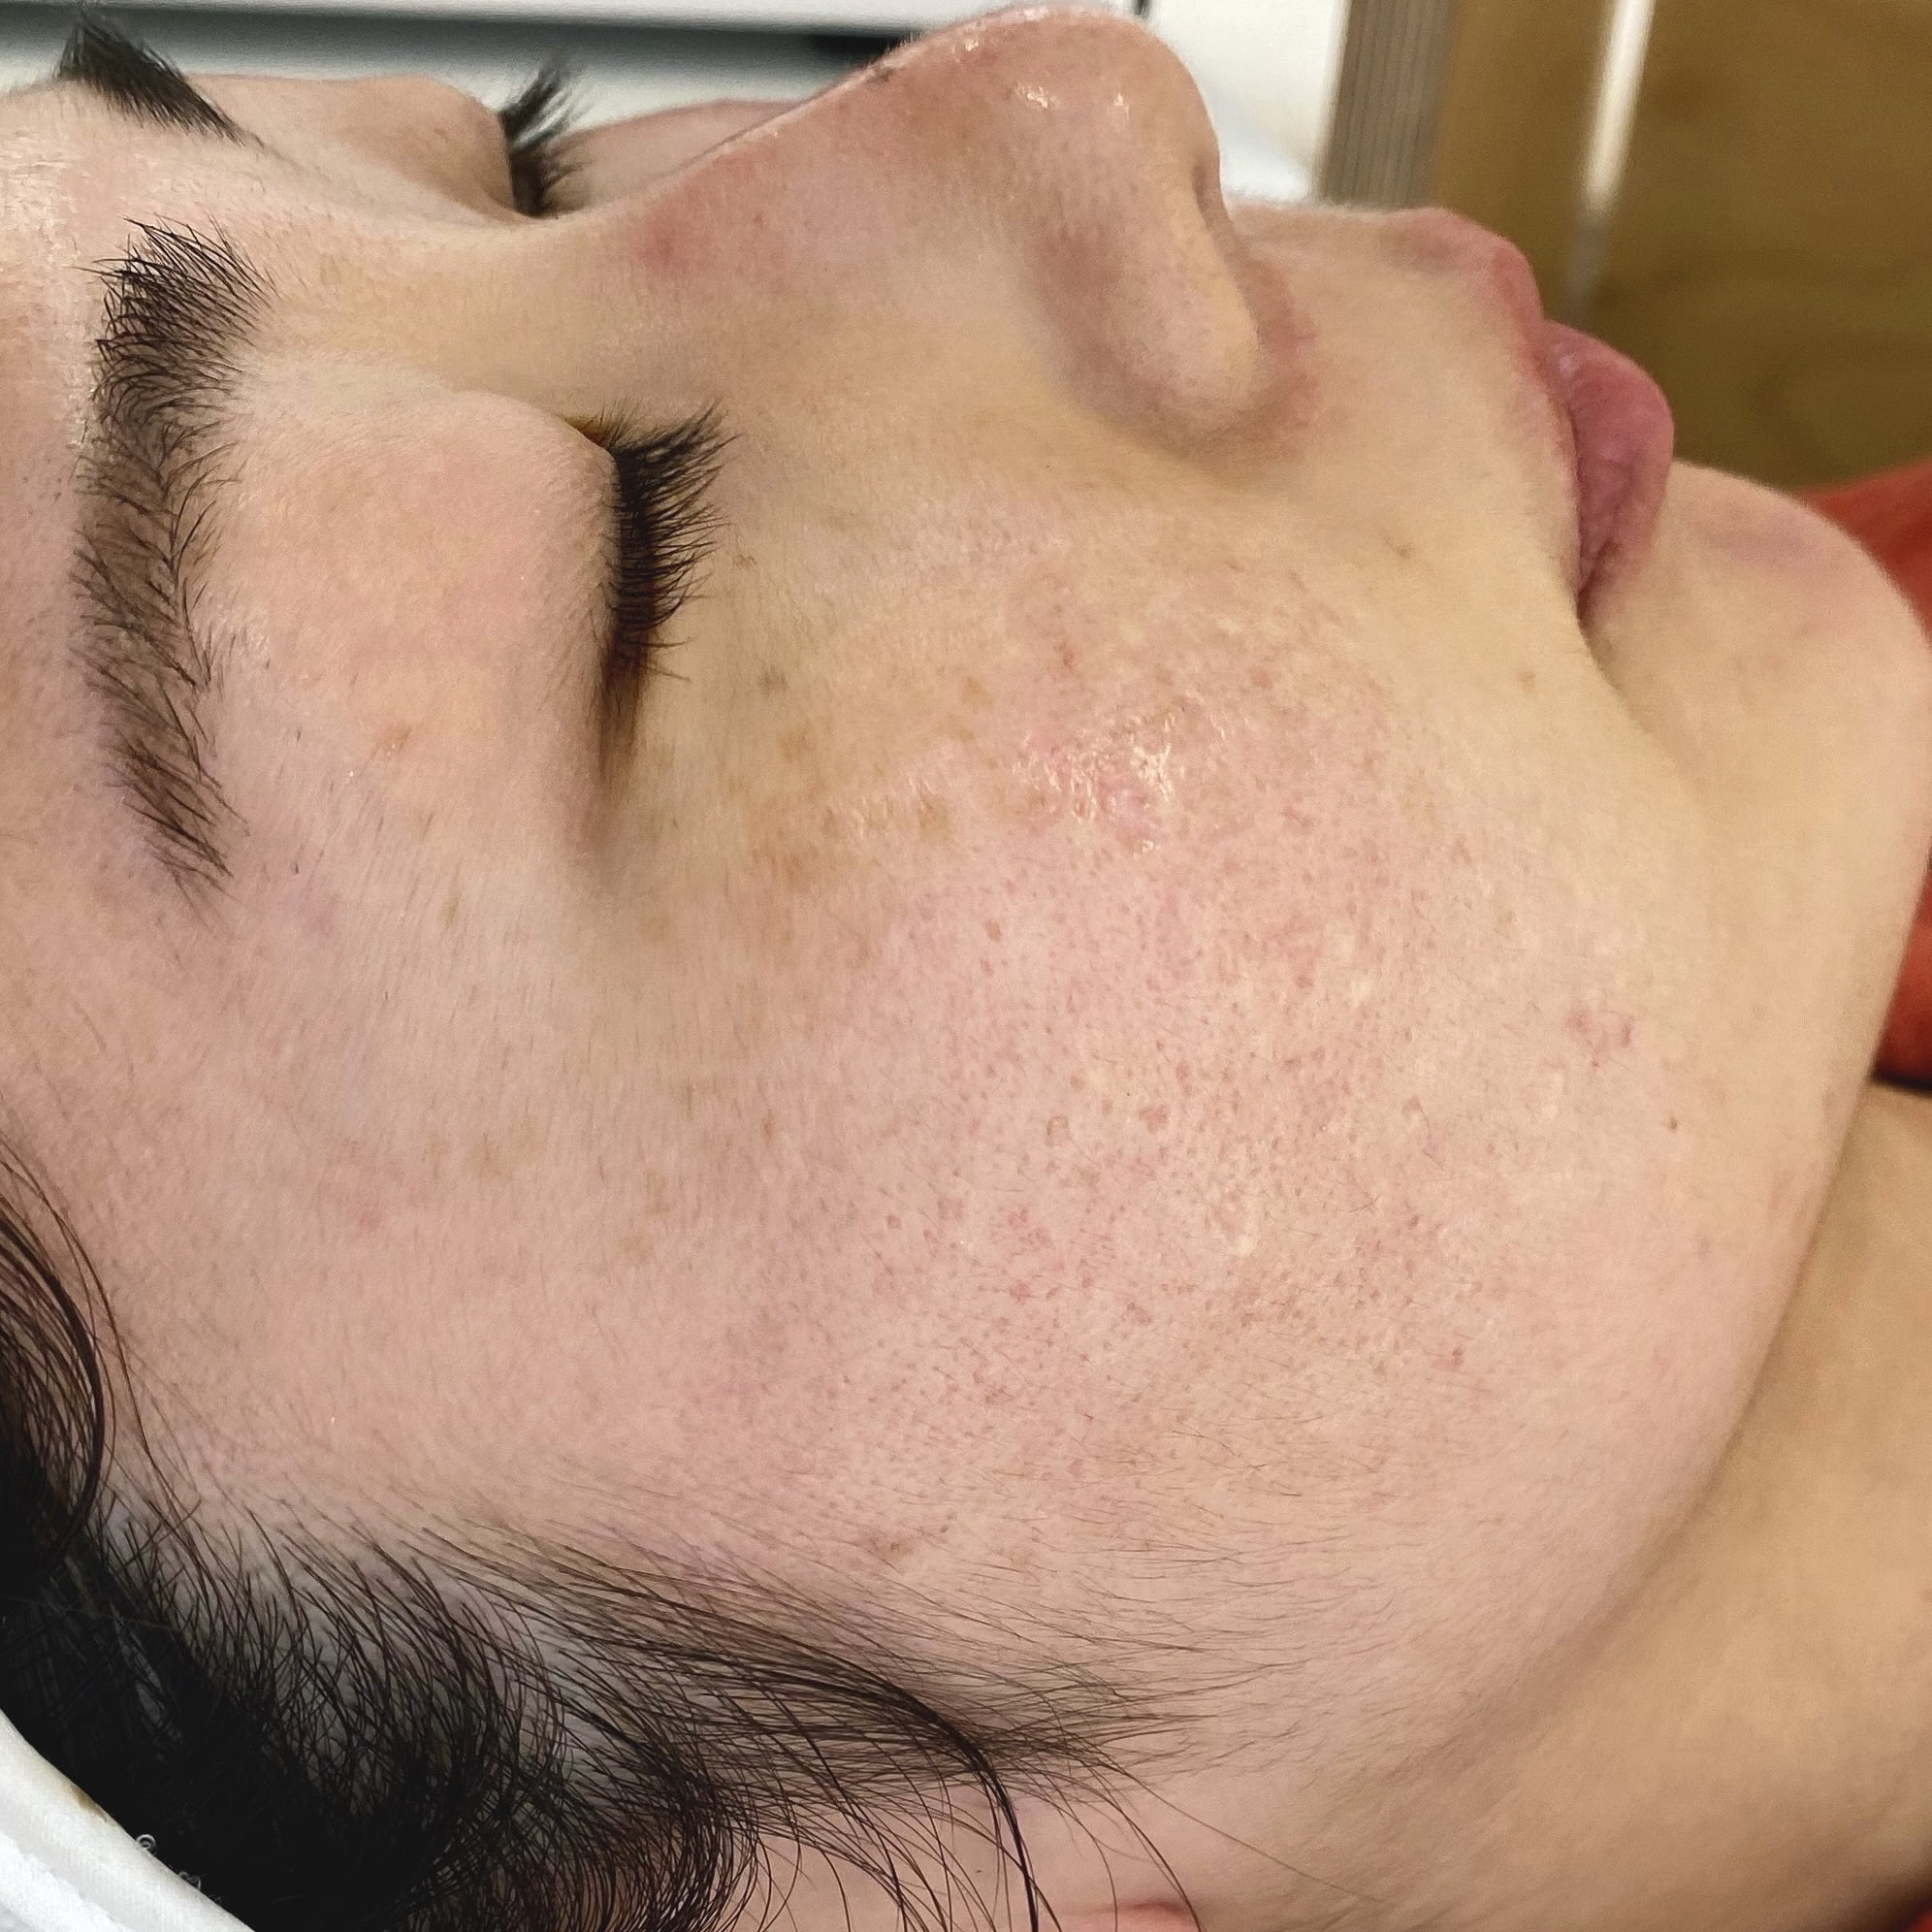 Client after 2 sessions of Venus Viva acne scar resurfacing.